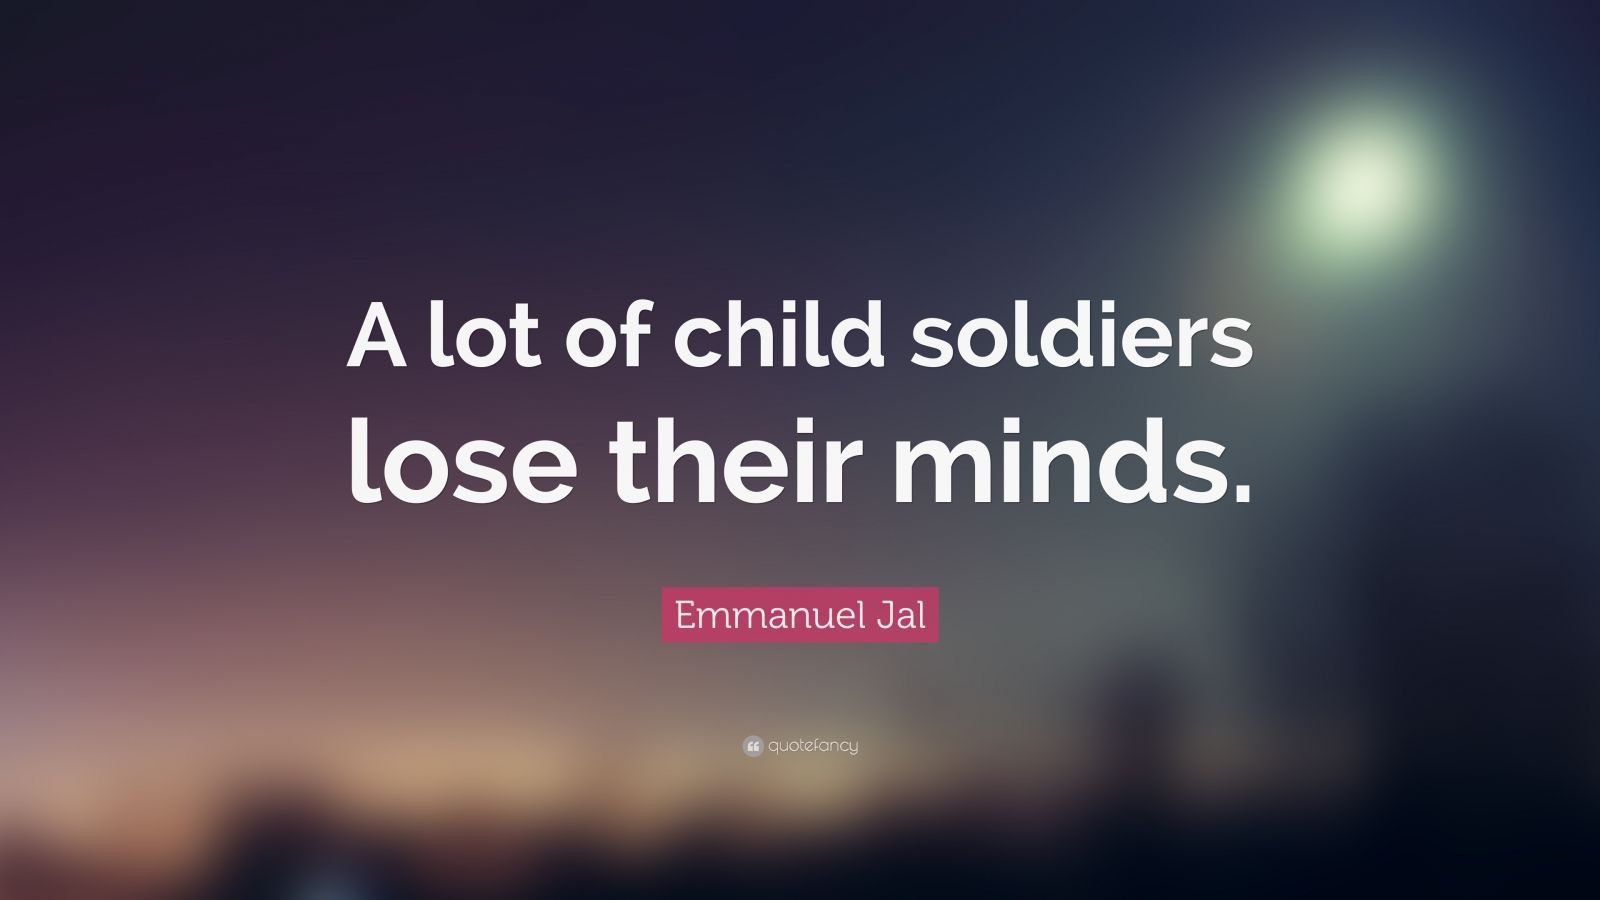 Child Soldiers Quote
 Emmanuel Jal Quote “A lot of child sol rs lose their